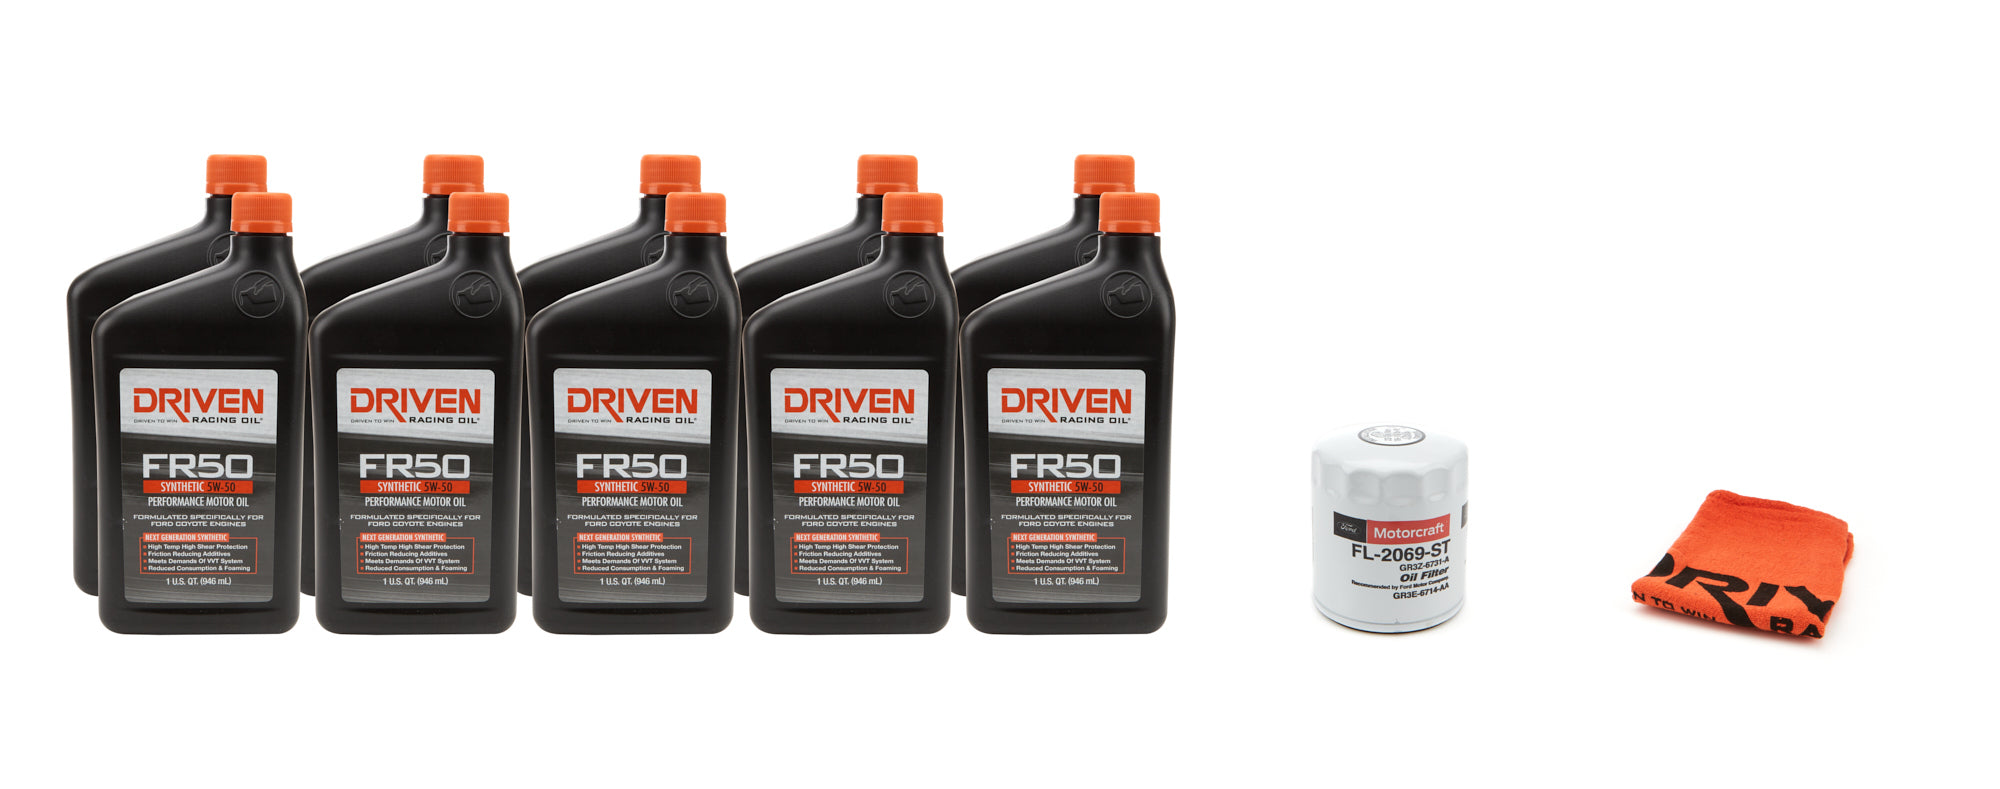 Driven Racing Oil 5w50 Oil Change Kit 2015 Mustang GT350 5.2L 10Qt. Oils, Fluids and Additives Motor Oil main image